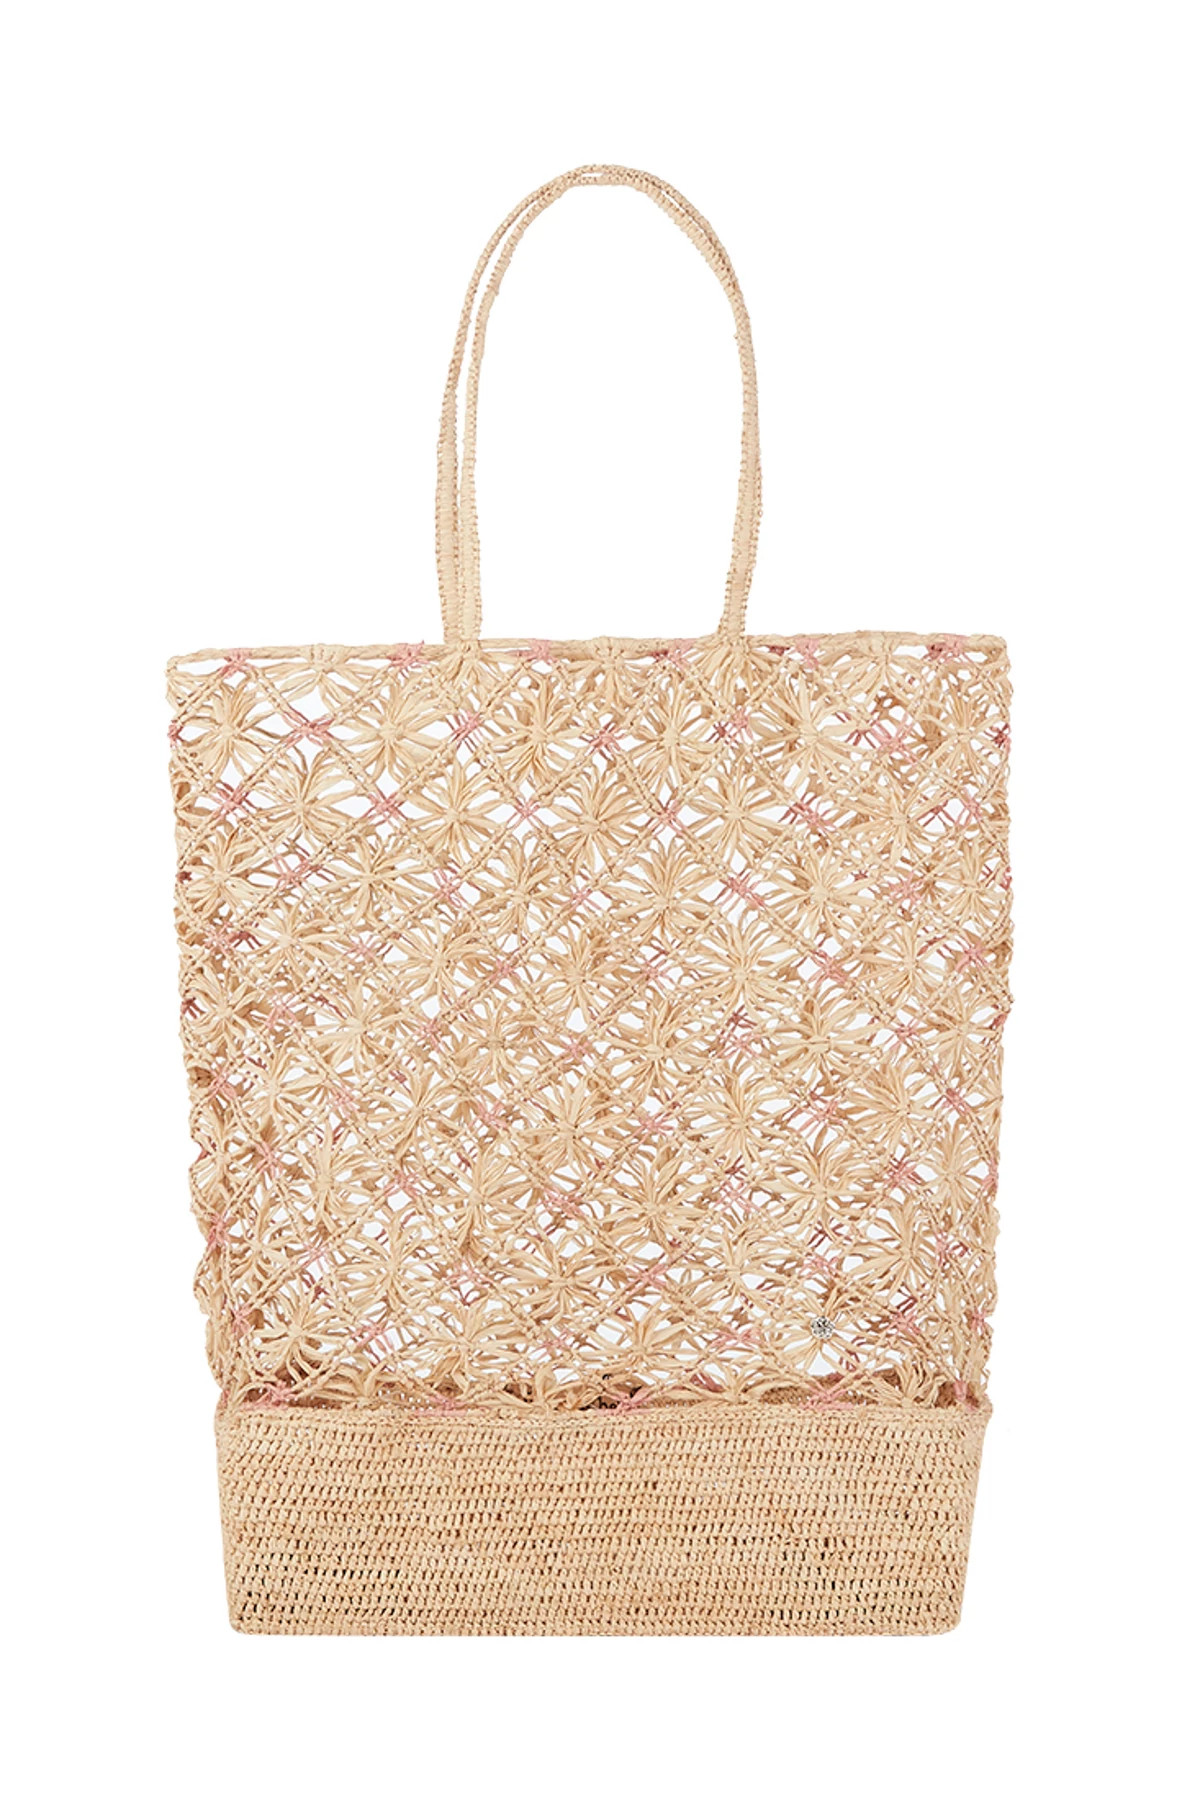 PINK/NATURAL Monrovia Woven Tote image number 1